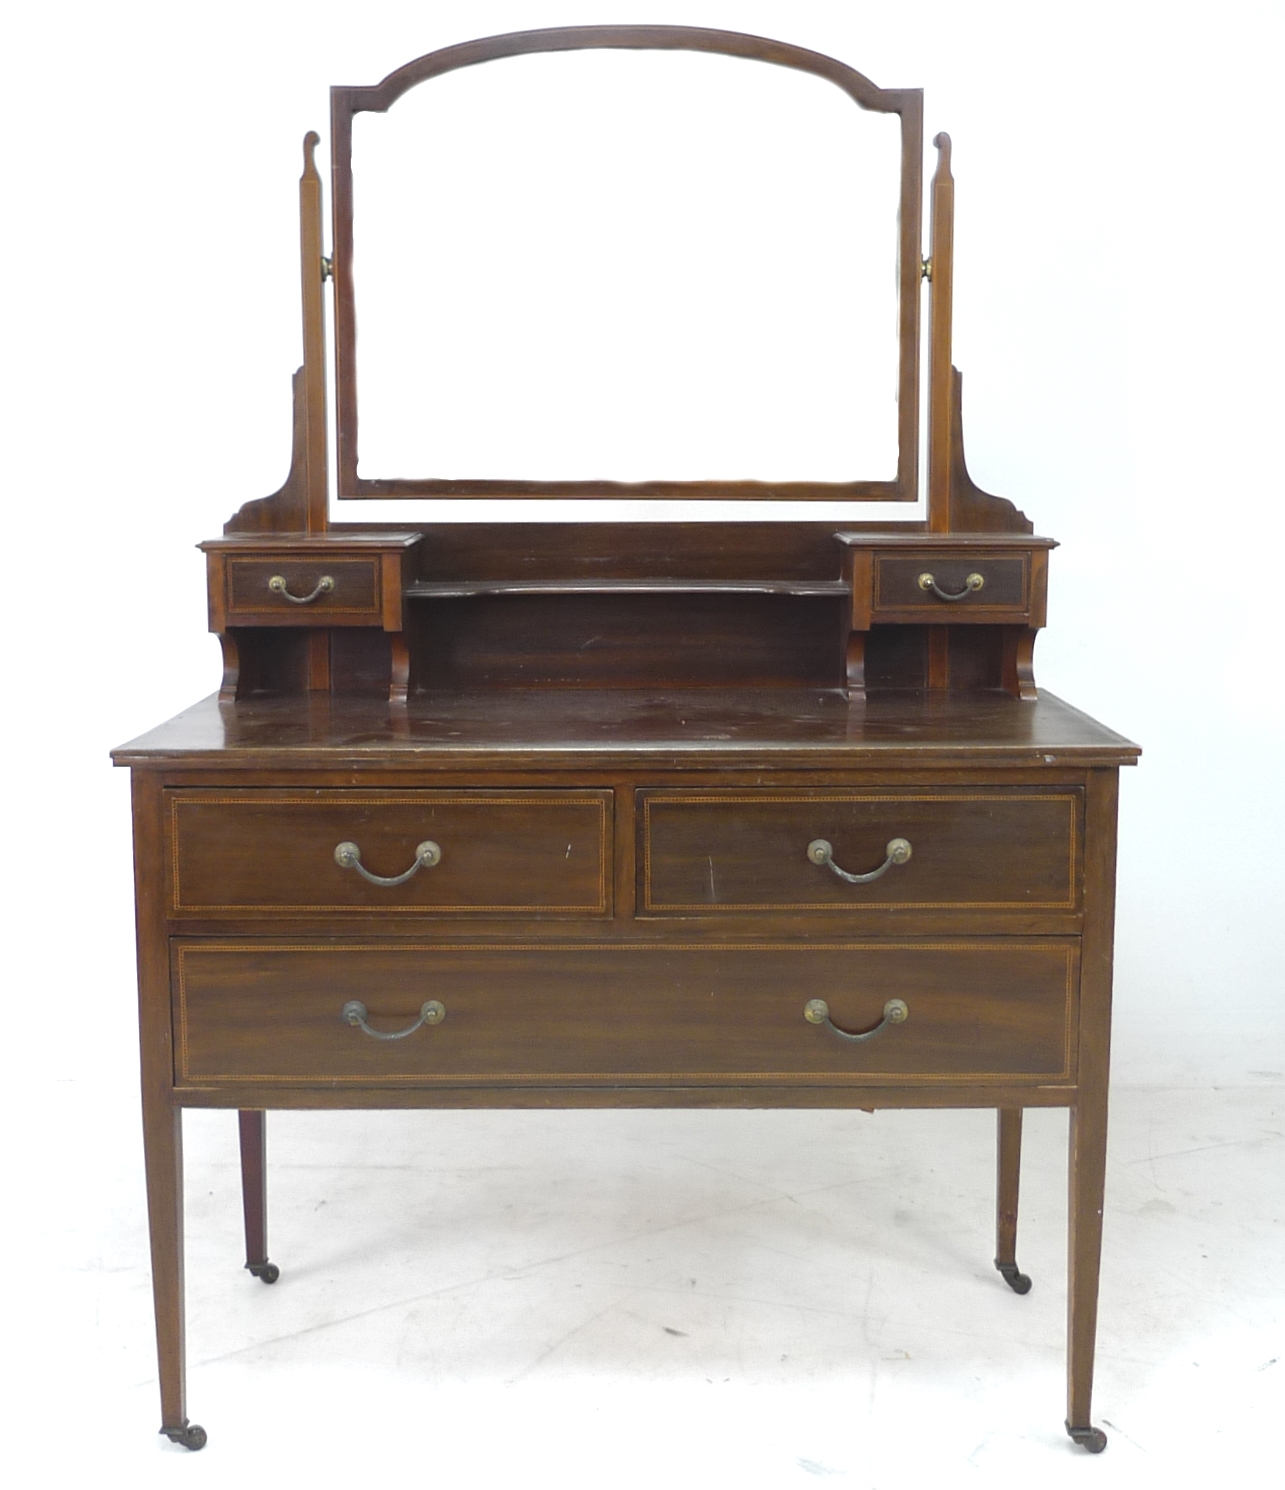 An Edwardian mahogany dressing table, with arched rectangular mirror, trinket drawers, over two